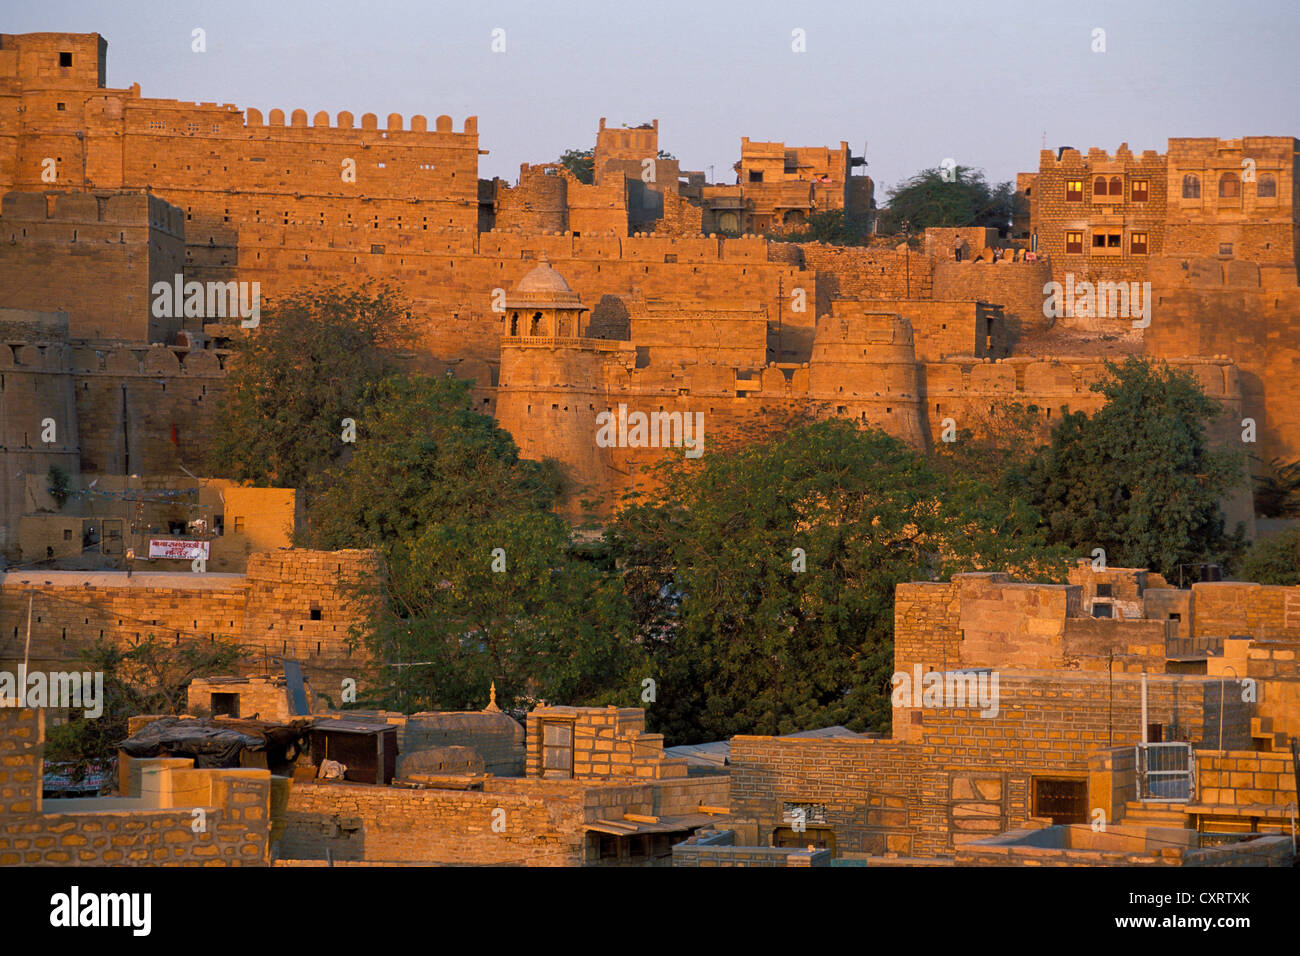 Honey-coloured exterior walls of the Fortress of Jaisalmer, Rajasthan, India, Asia Stock Photo